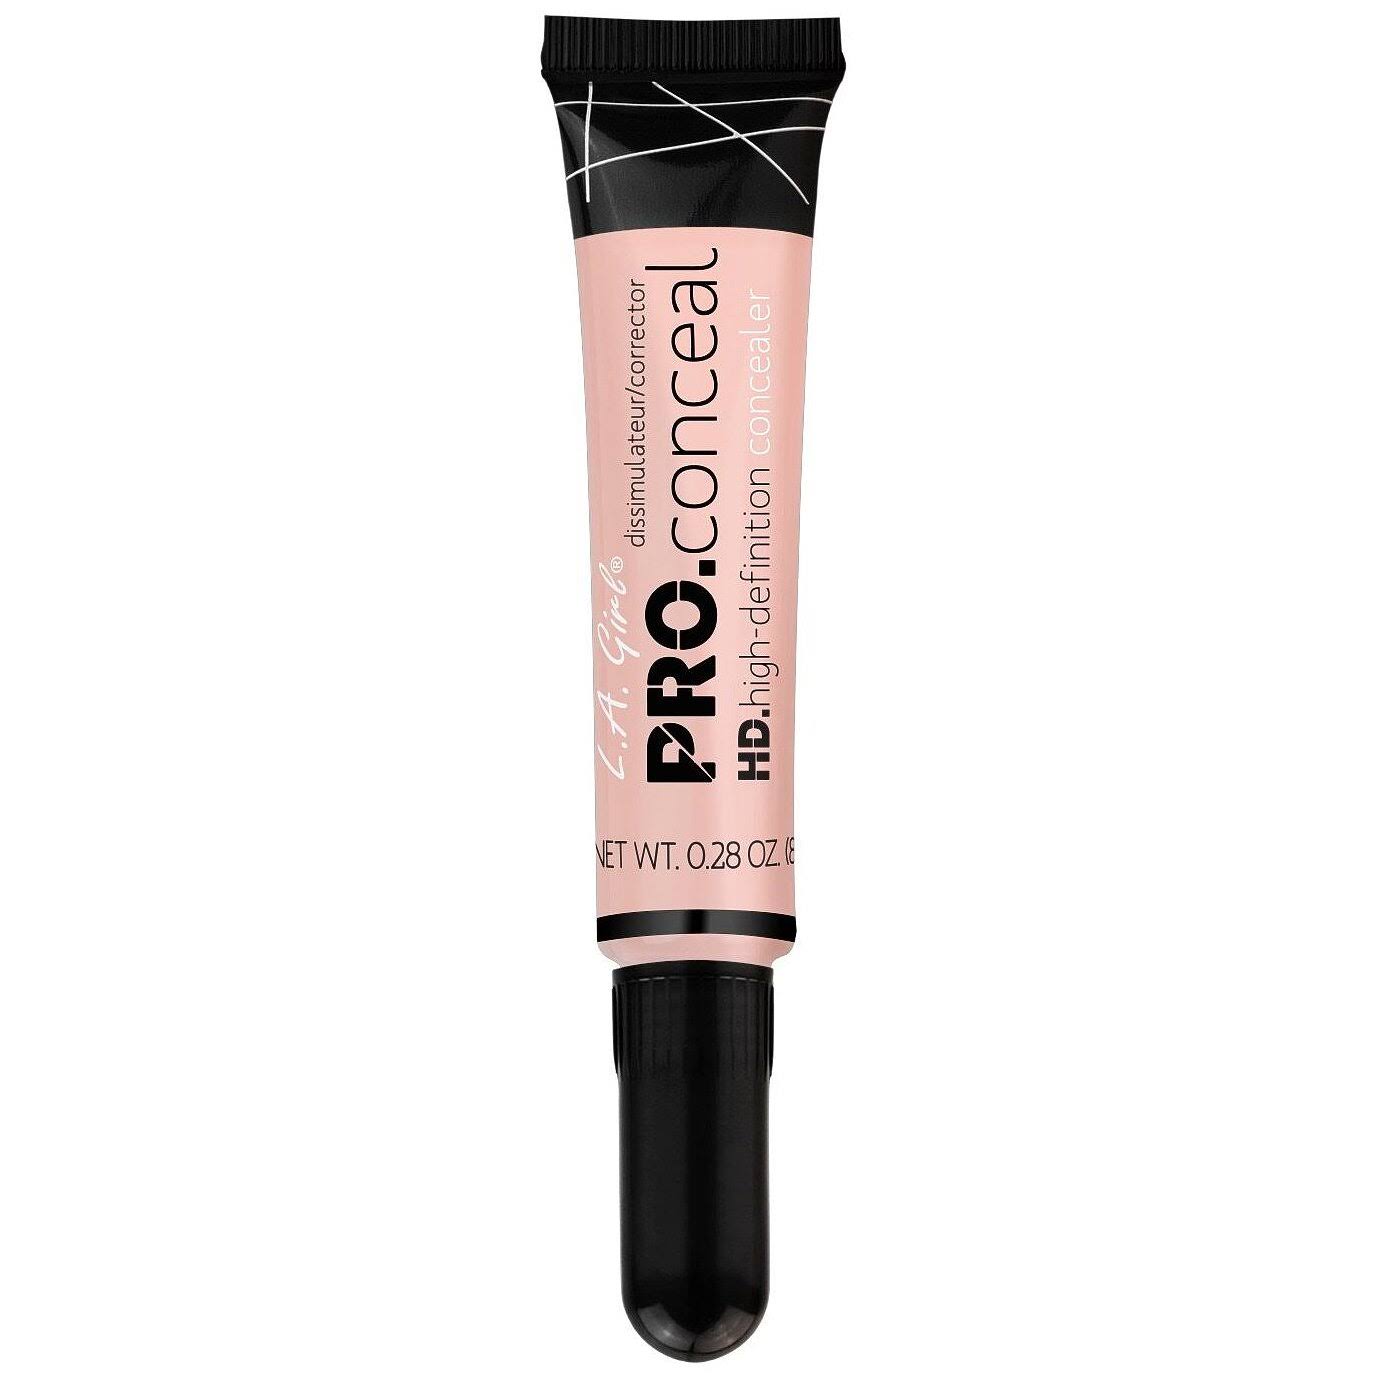 L.A. Girl Hd Pro Conceal HD Concealer - Cool Pink Corrector, 1oz